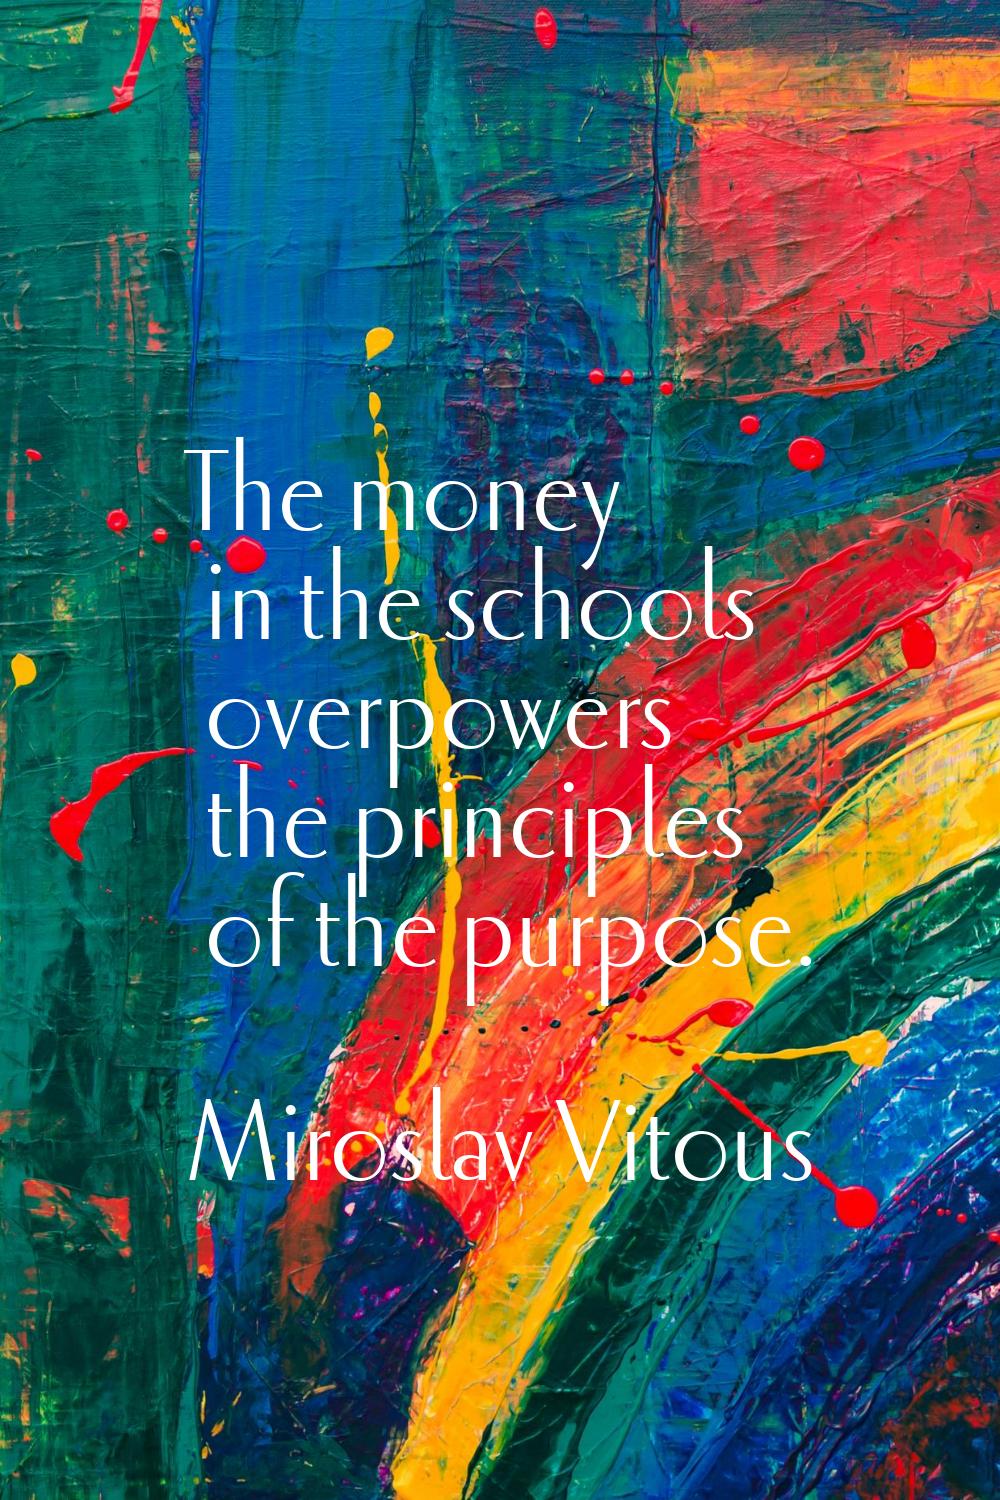 The money in the schools overpowers the principles of the purpose.